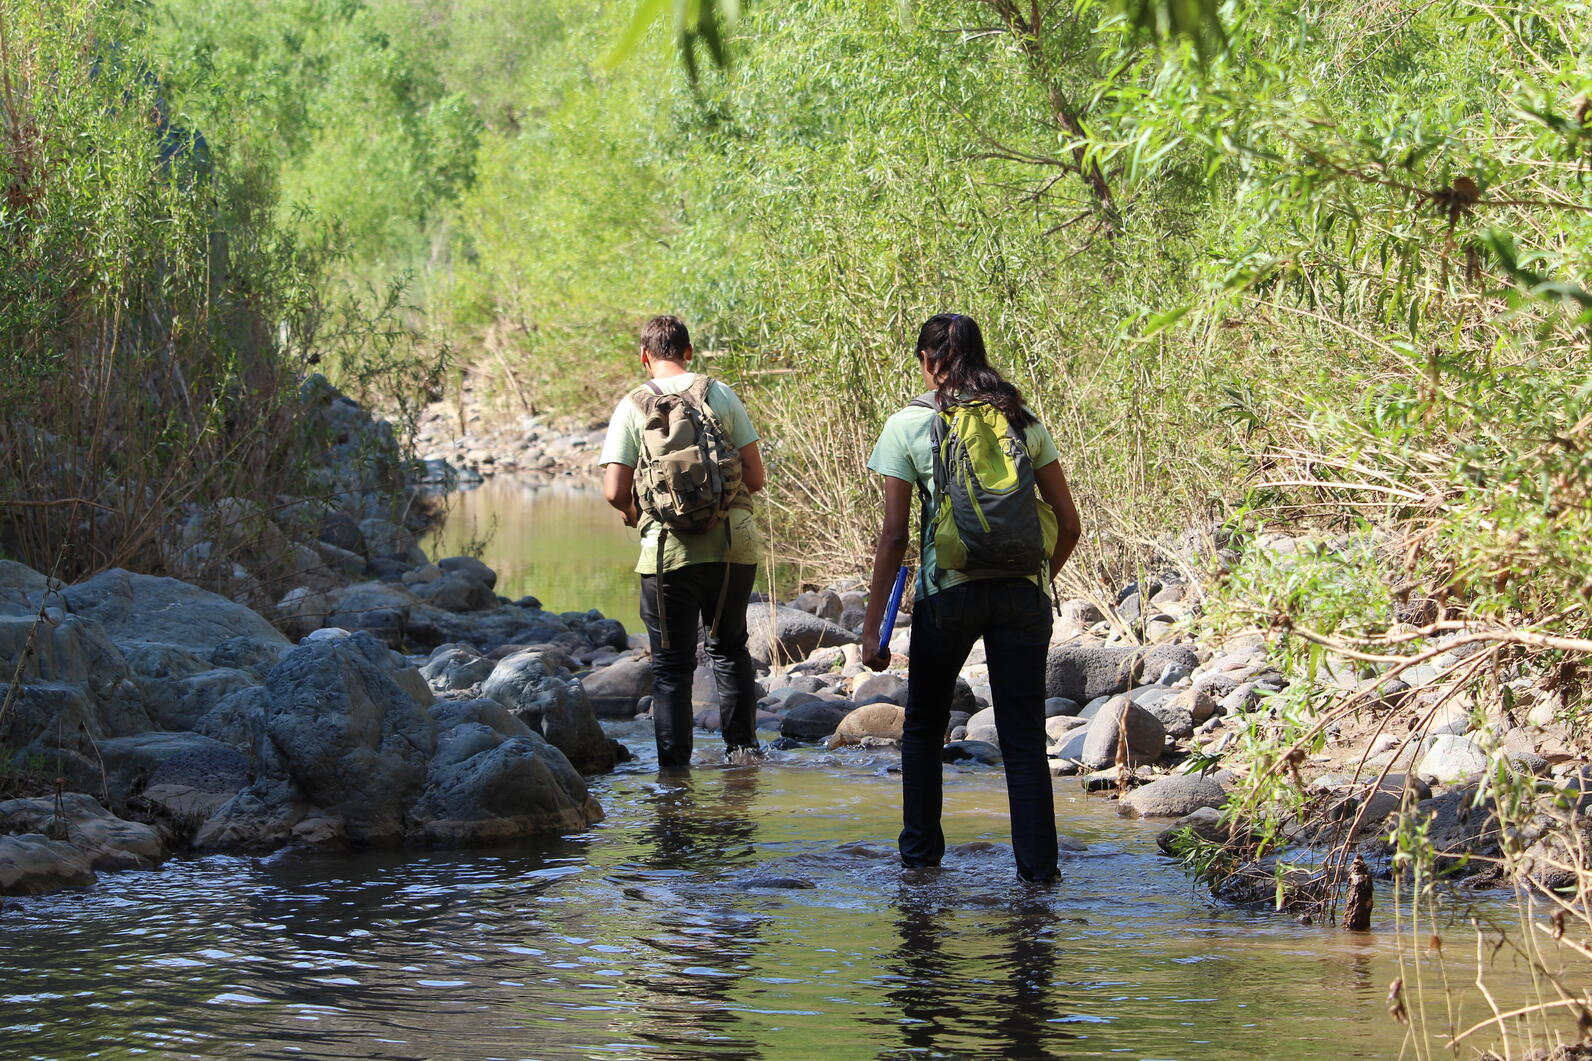 Two young interns walk upstream in ankle deep water as they approach a dense riparian area.